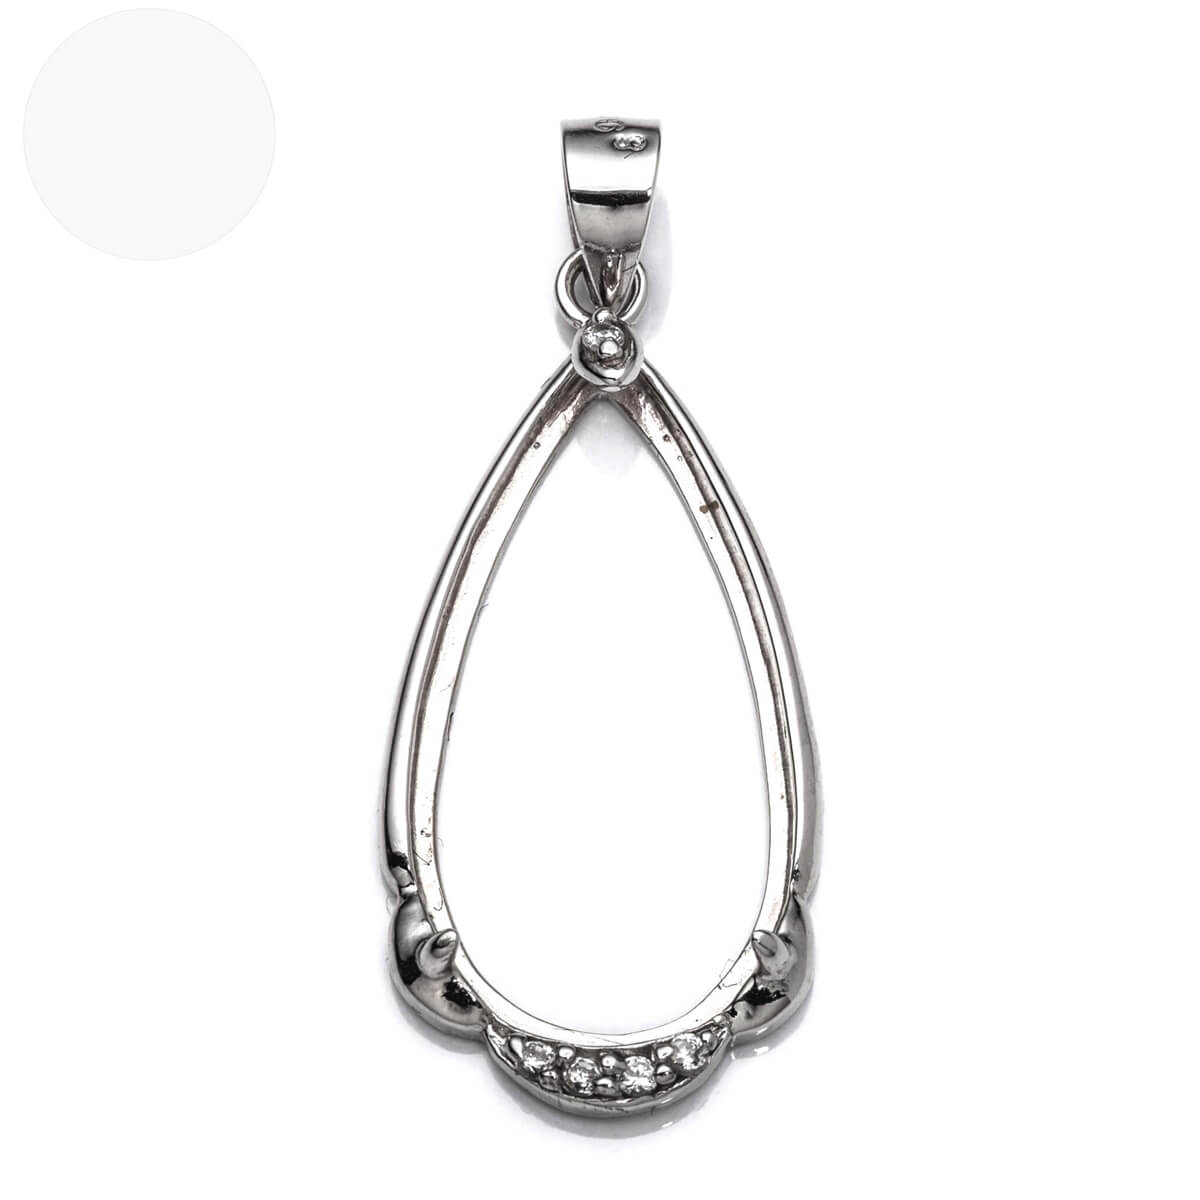 Pendant with Cubic Zirconia Inlays and Pear Shape Mounting and Bail in Sterling Silver 10x24mm